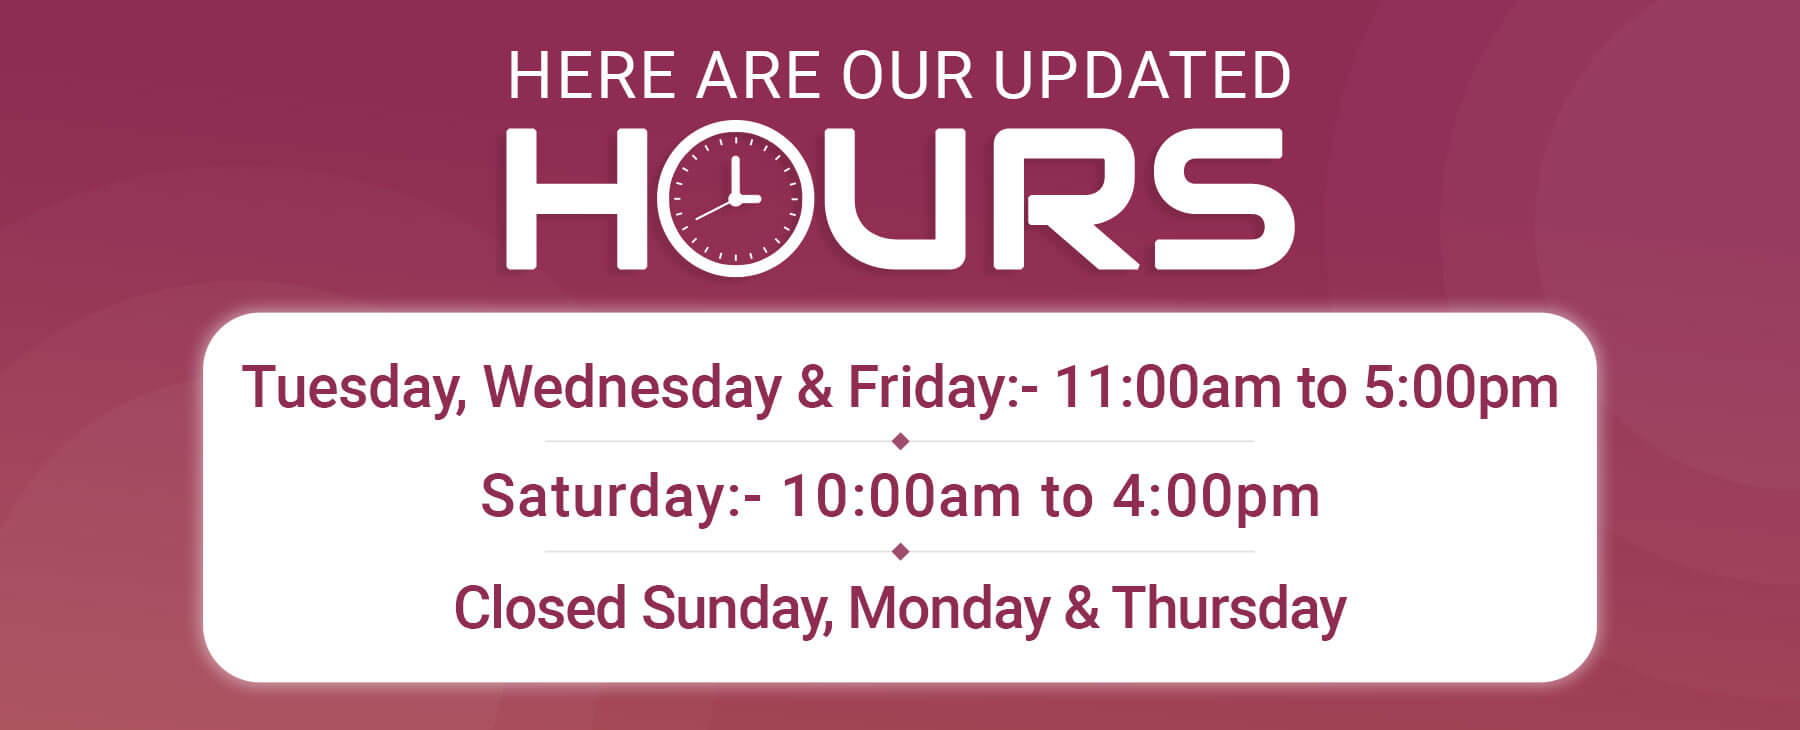 Our New Hours at Henry's Jewelers At Henry's Jewelers